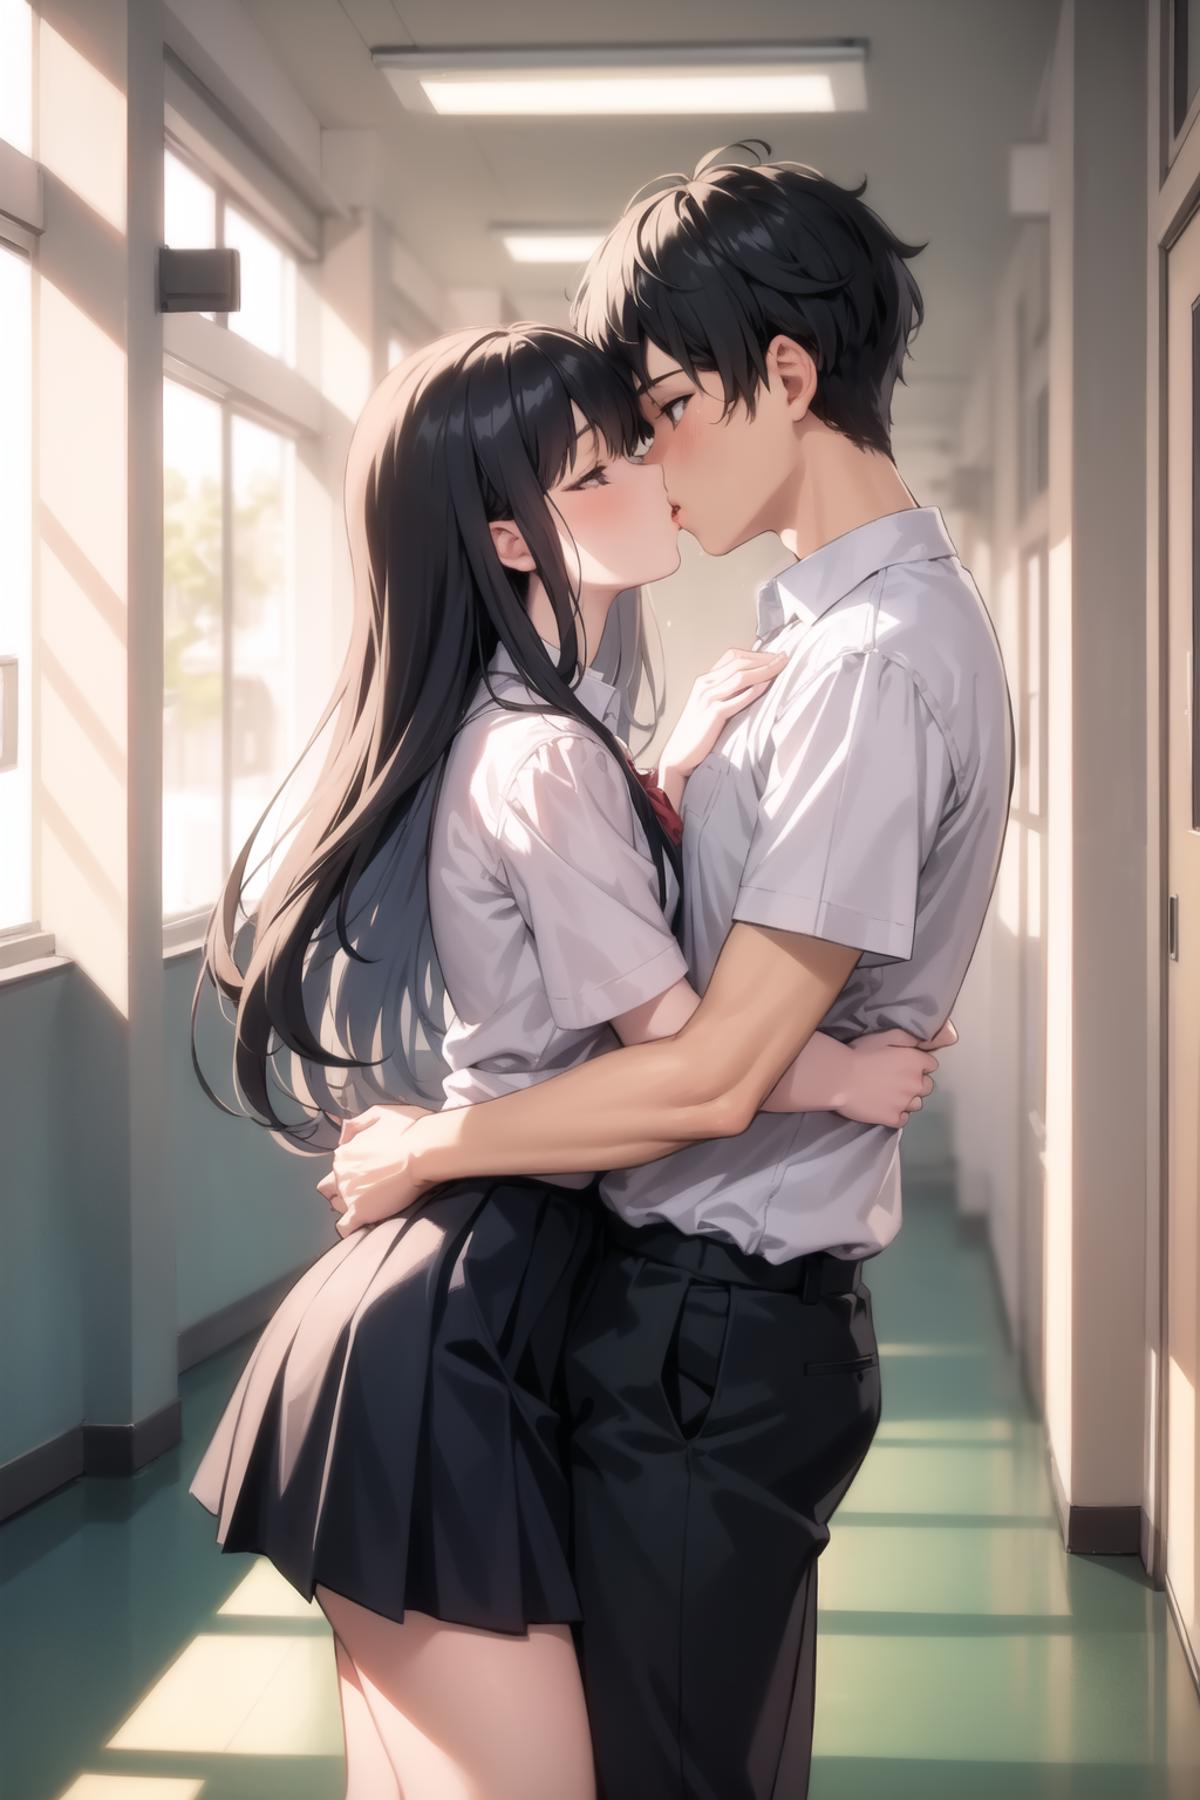 Anime Kissing Scene: Boy and Girl Locked in Embrace